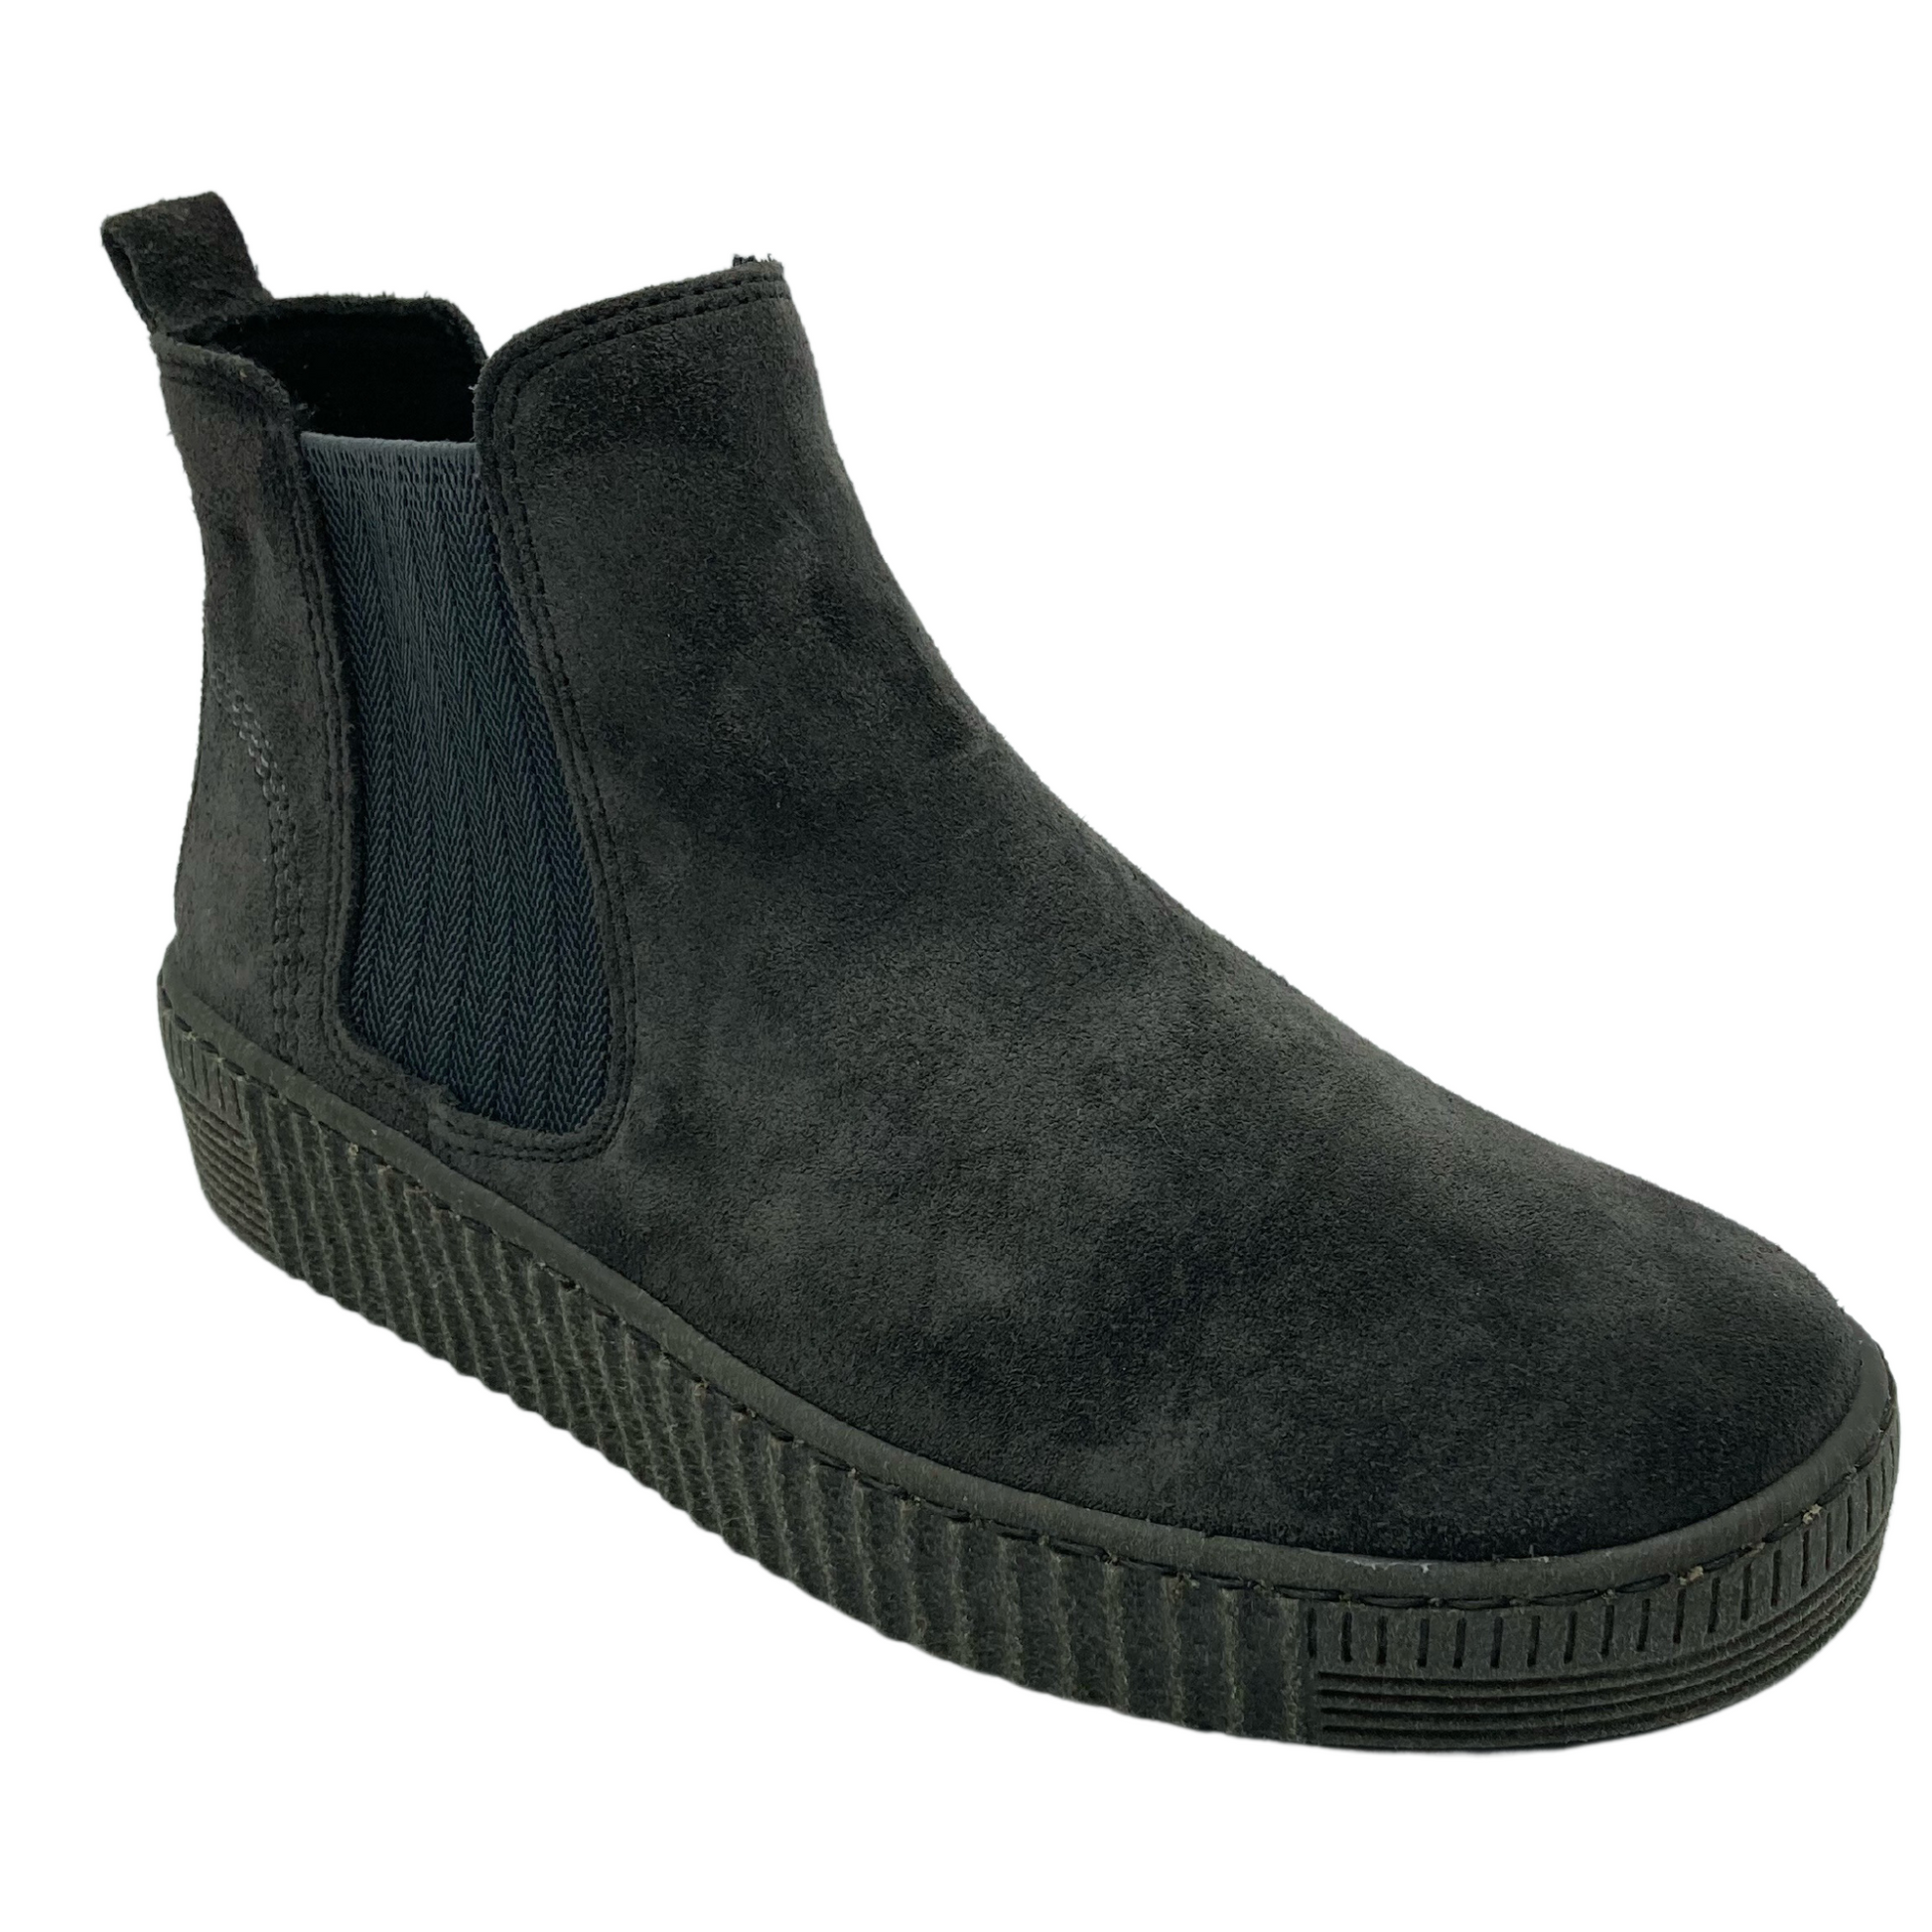 45 degree angled view of grey suede ankle bootie with elastic side gore and pull-on heel tab